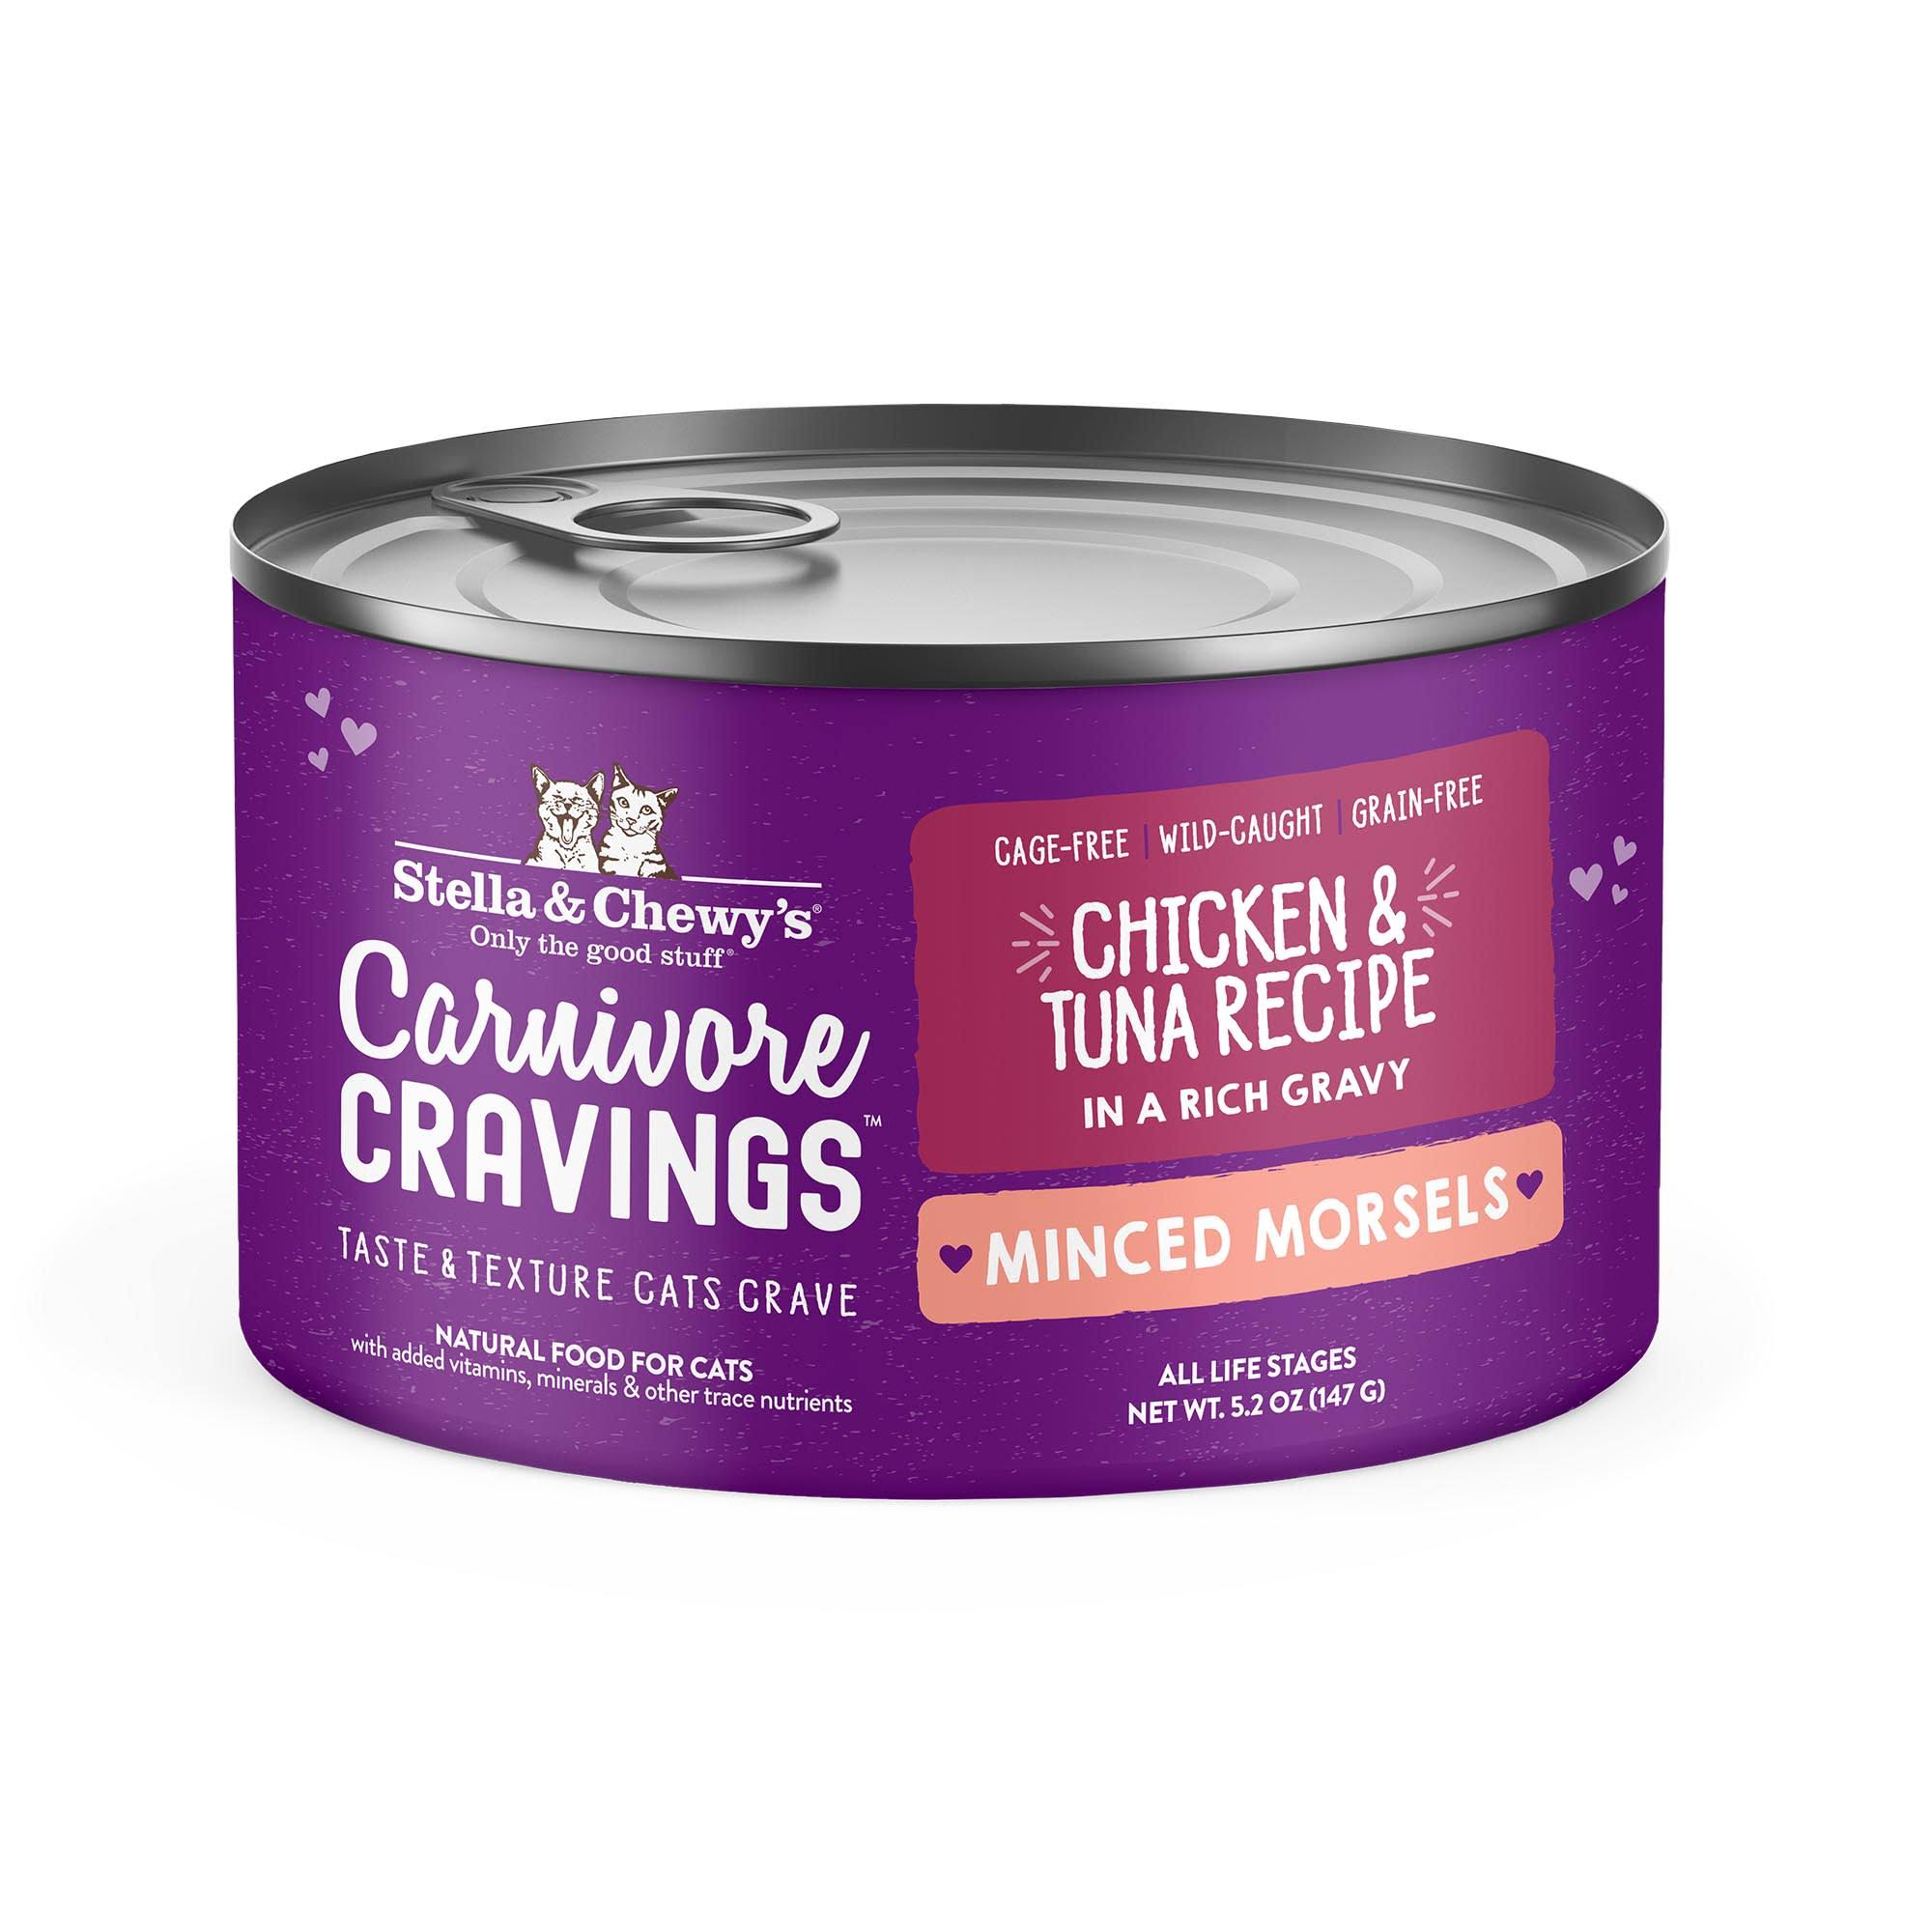 Stella & Chewy's Carnivore Cravings Minced Morsels Chicken & Tuna Recipe Wet Cat Food, 5.2-Oz